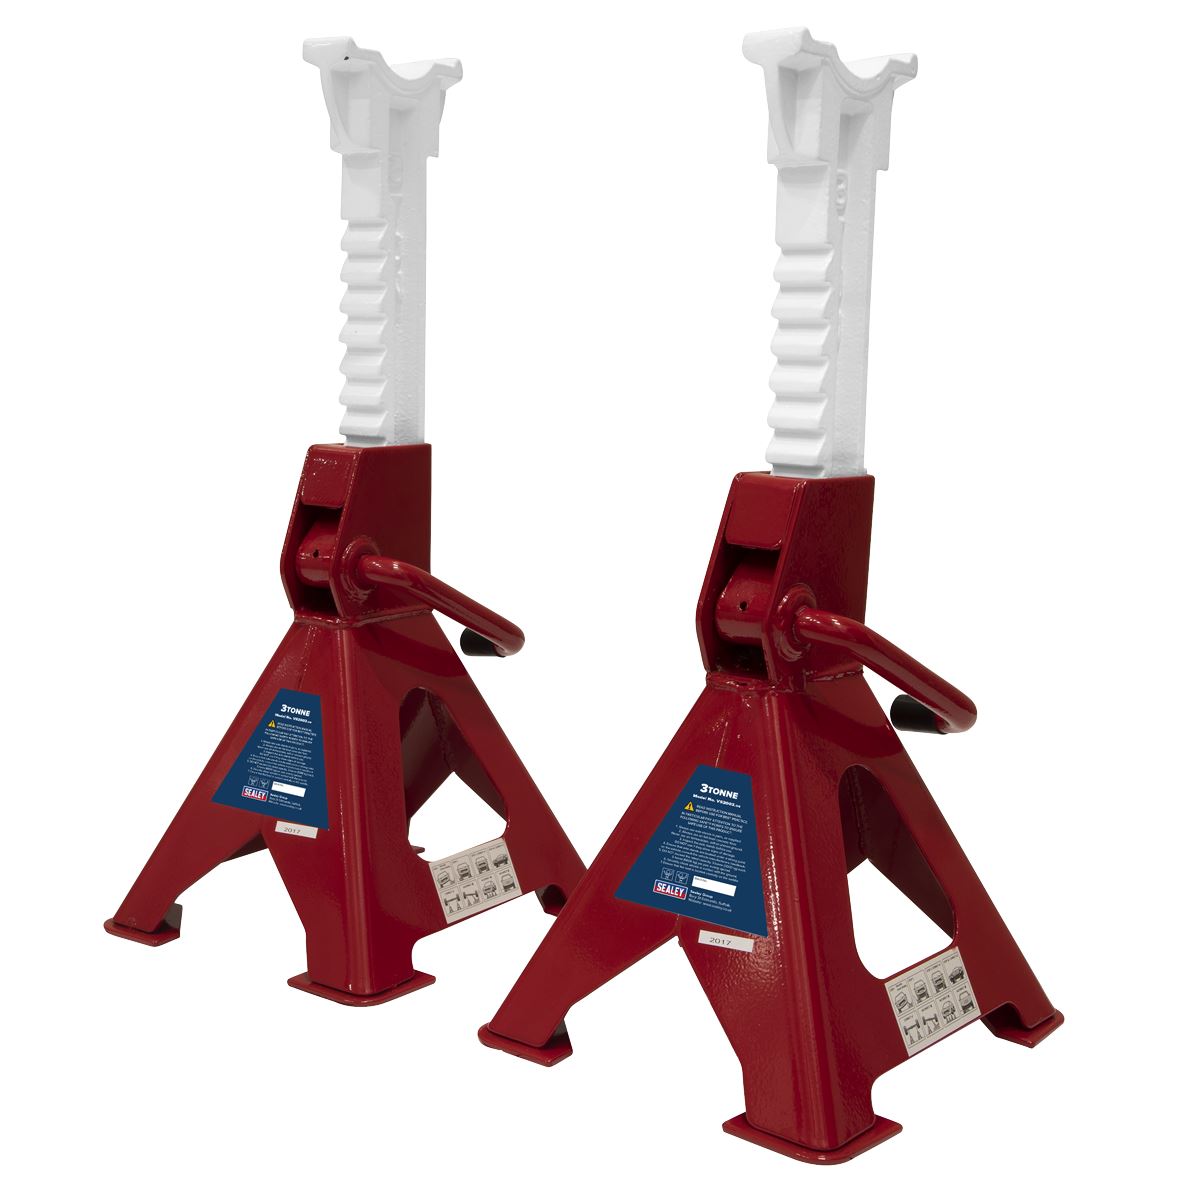 Sealey Ratchet Type Axle Stands (Pair) 3 Tonne Capacity per Stand